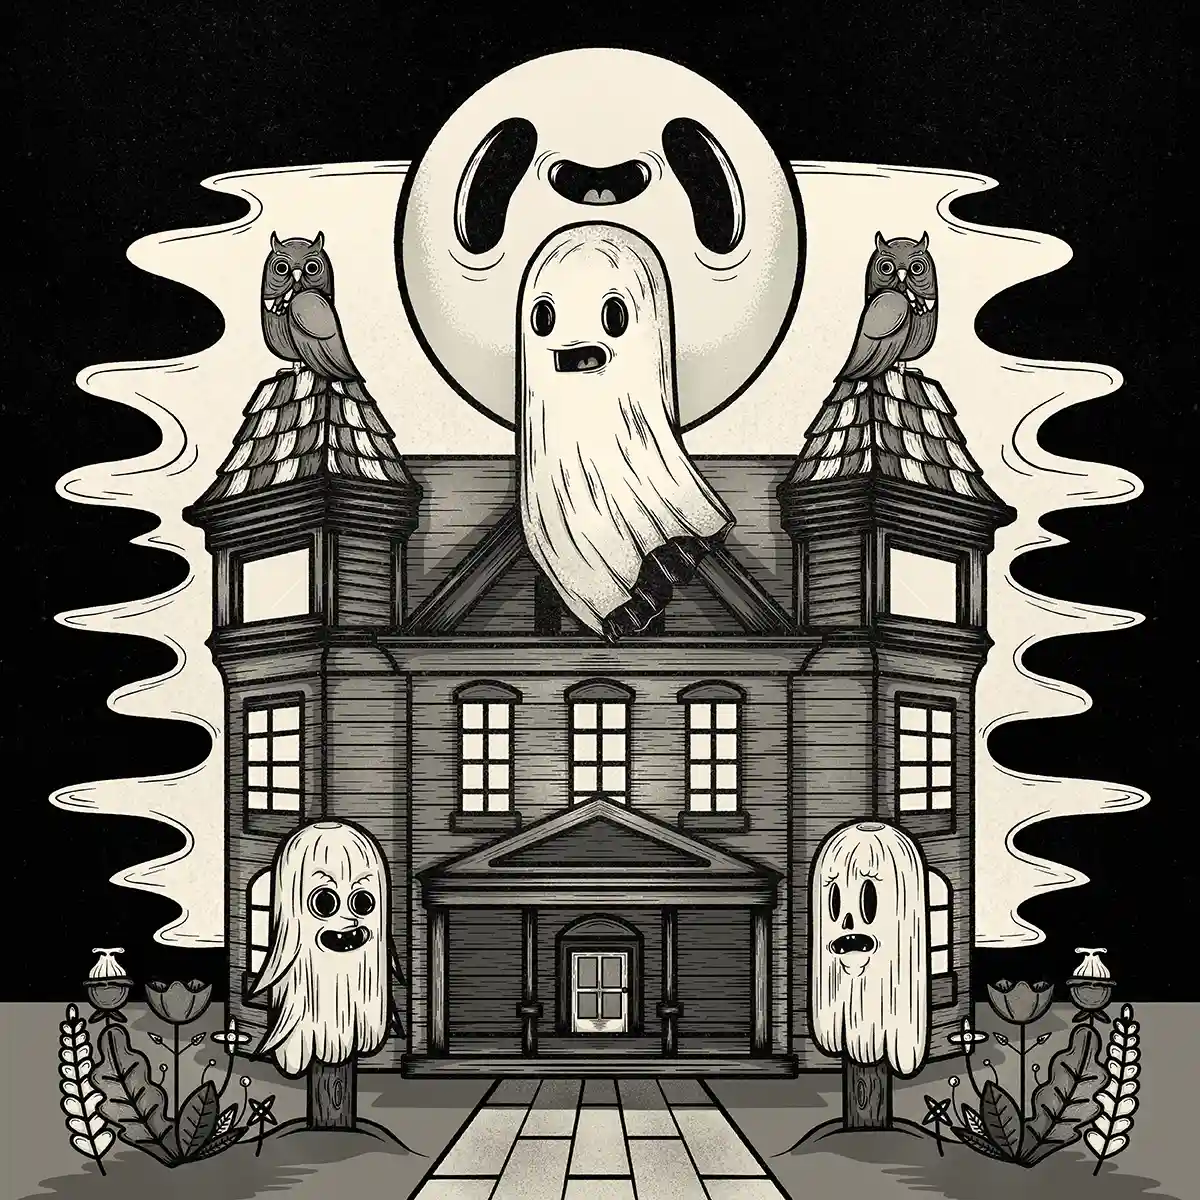 Illustration of a haunted house with a ghost hovering above with two spooky looking trees